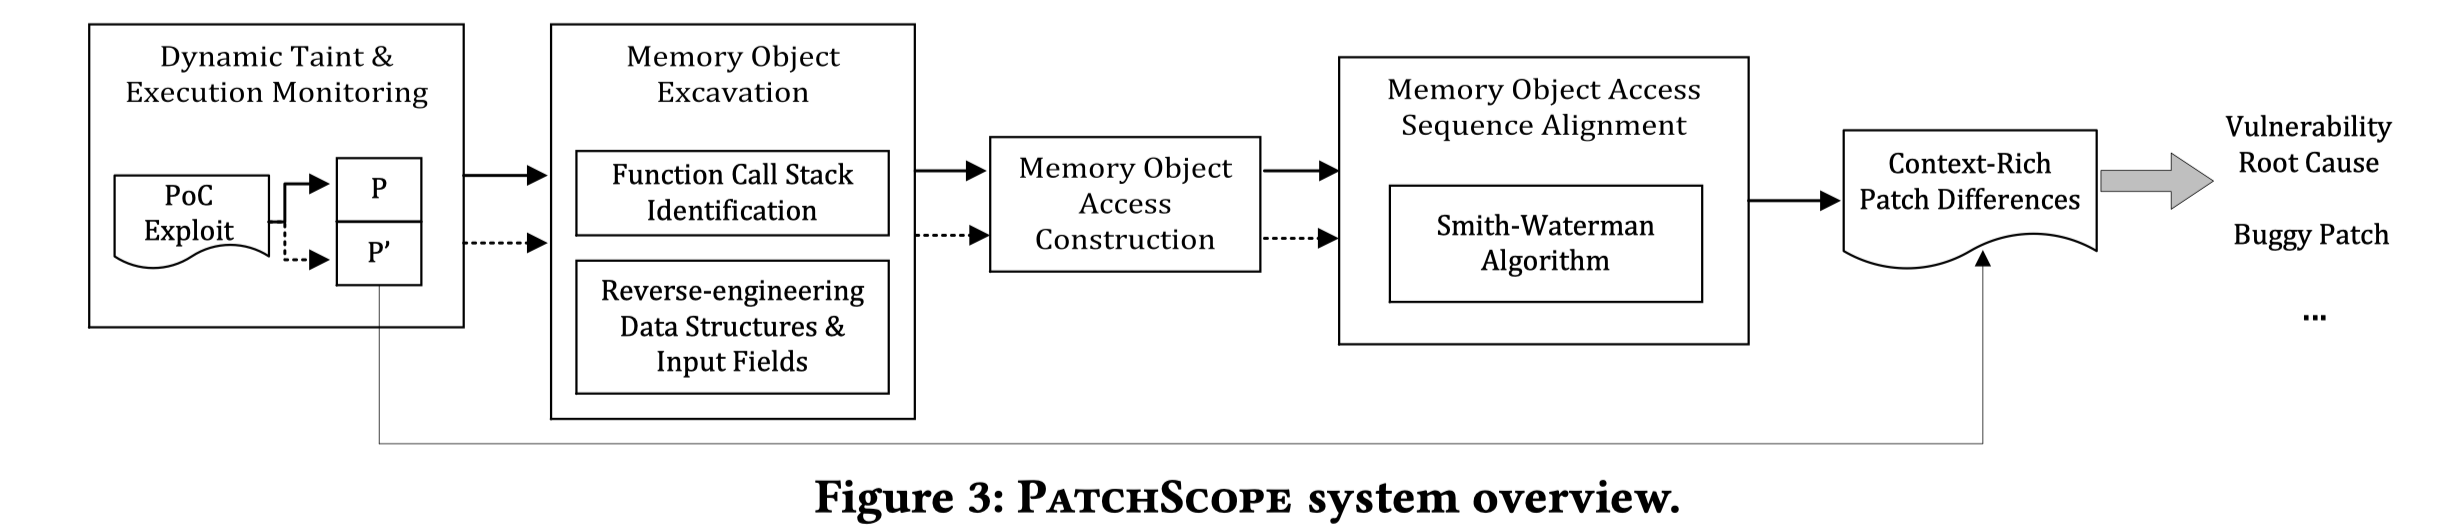 2020-1023-PatchScope%20Memory%20Object%20Centric%20Patch%20D%203840f490ef5a49e6b9e2c2b72dfcebbc/Untitled%206.png